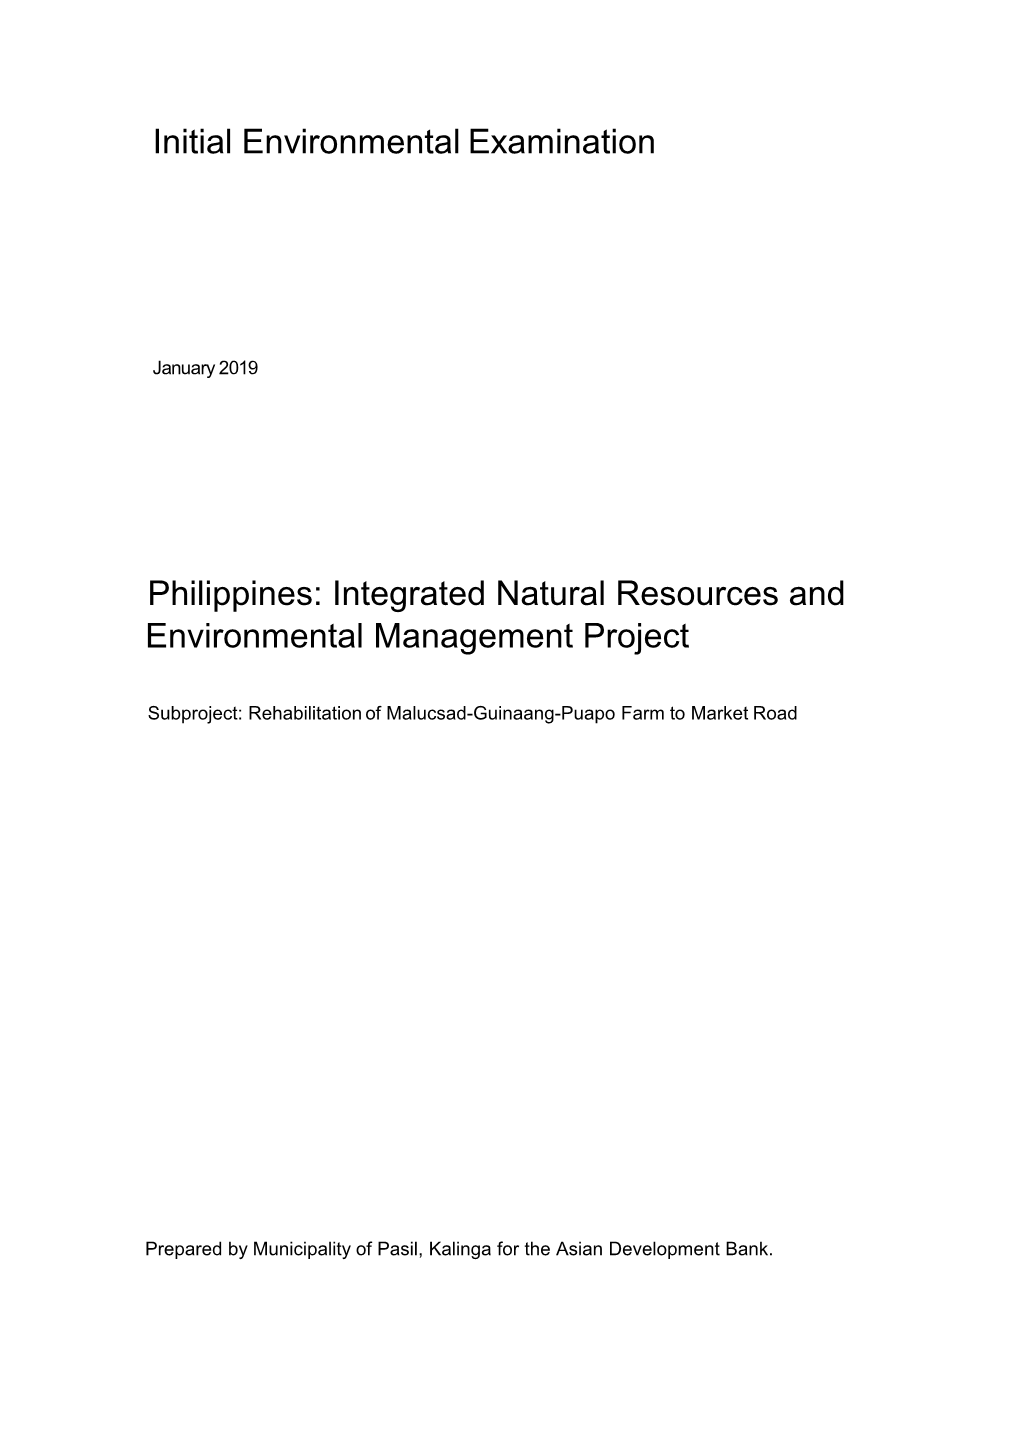 41220-013: Integrated Natural Resources and Environmental